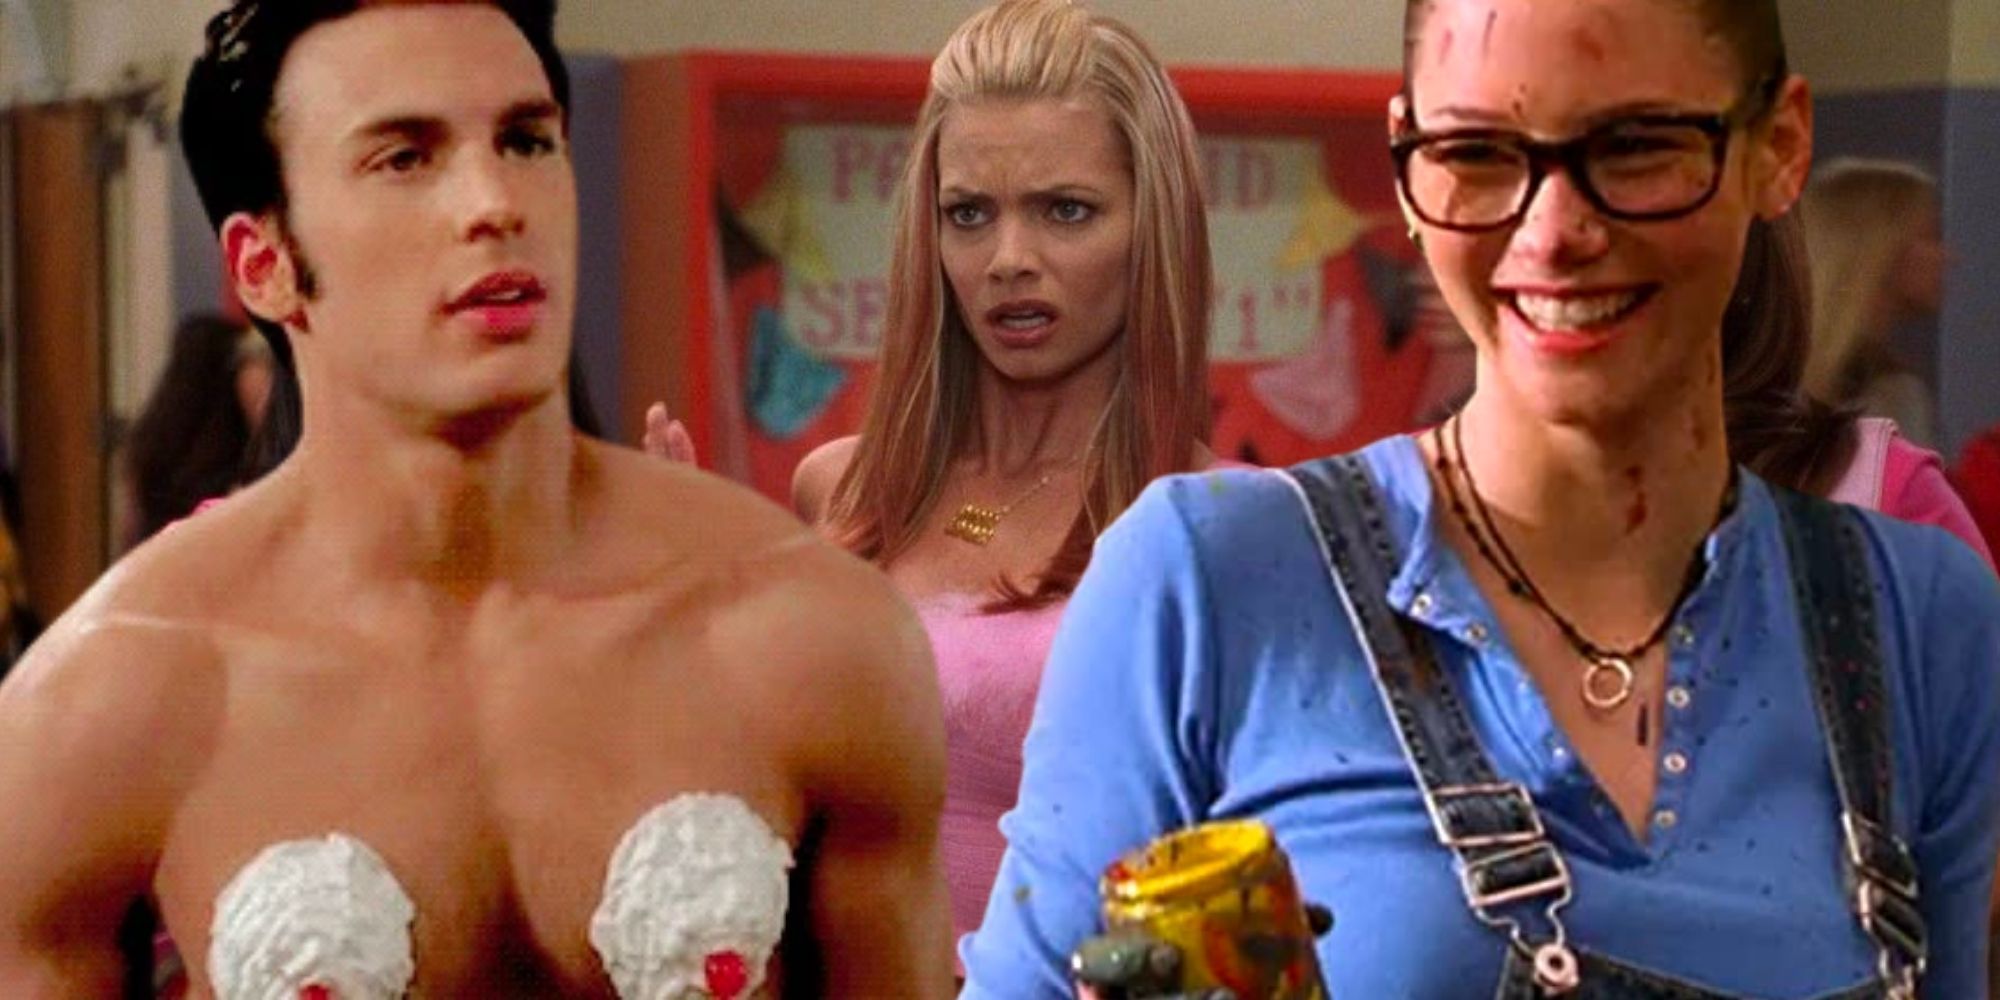 Not Another Teen Movie Chris Evans topless, Chyler Leigh covered in paint and Jaime Pressly looking shocked